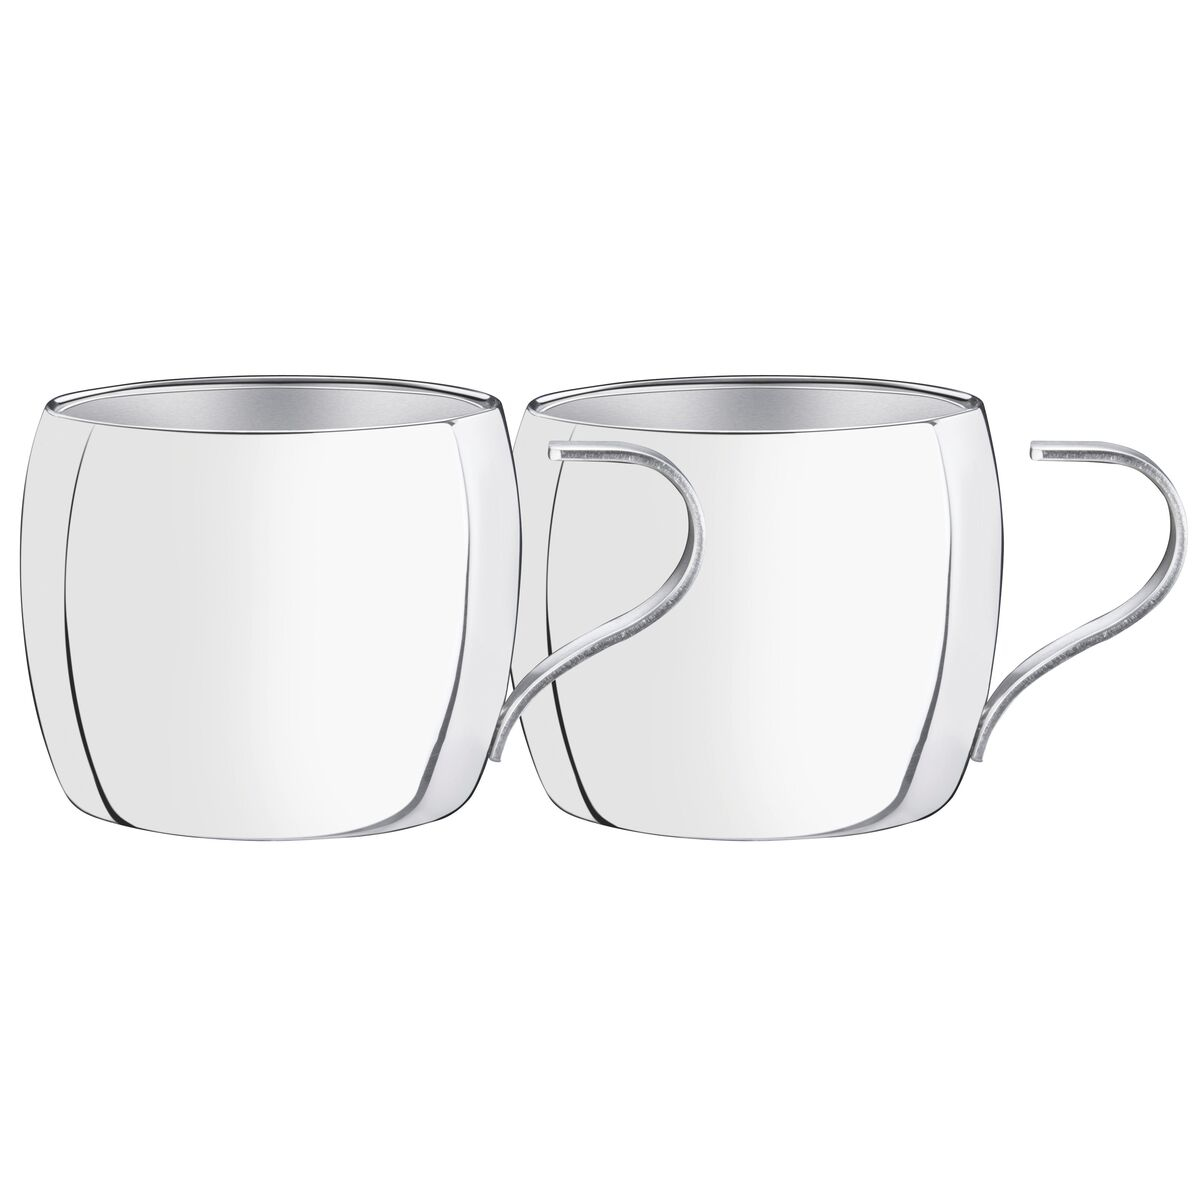 Tramontina stainless steel tea and cappuccino cup set with shiny finish, 2 pc set